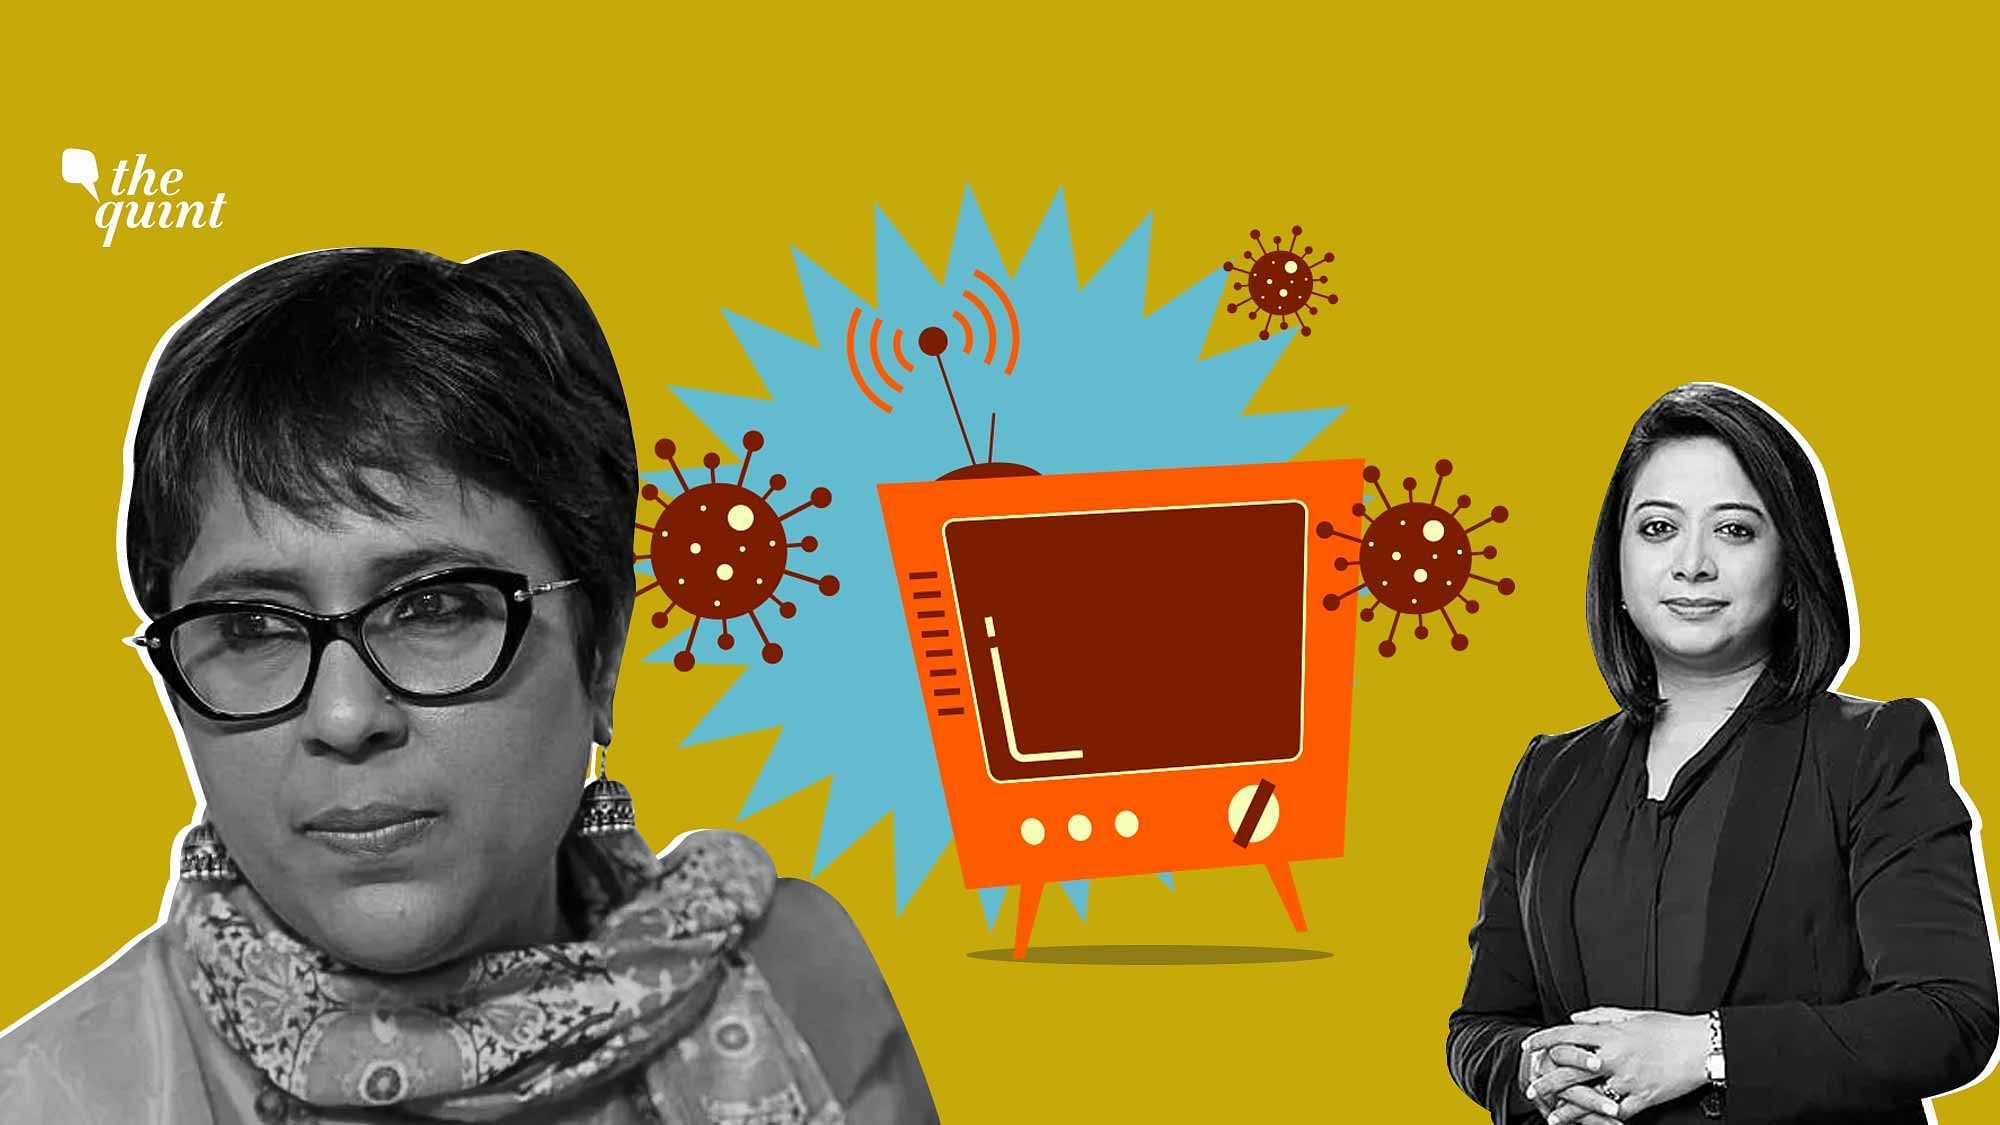 Journalists Barkha Dutt and Faye D’Souza on Friday, 15 May, deliberated on the critical role of journalists during the coronavirus pandemic.